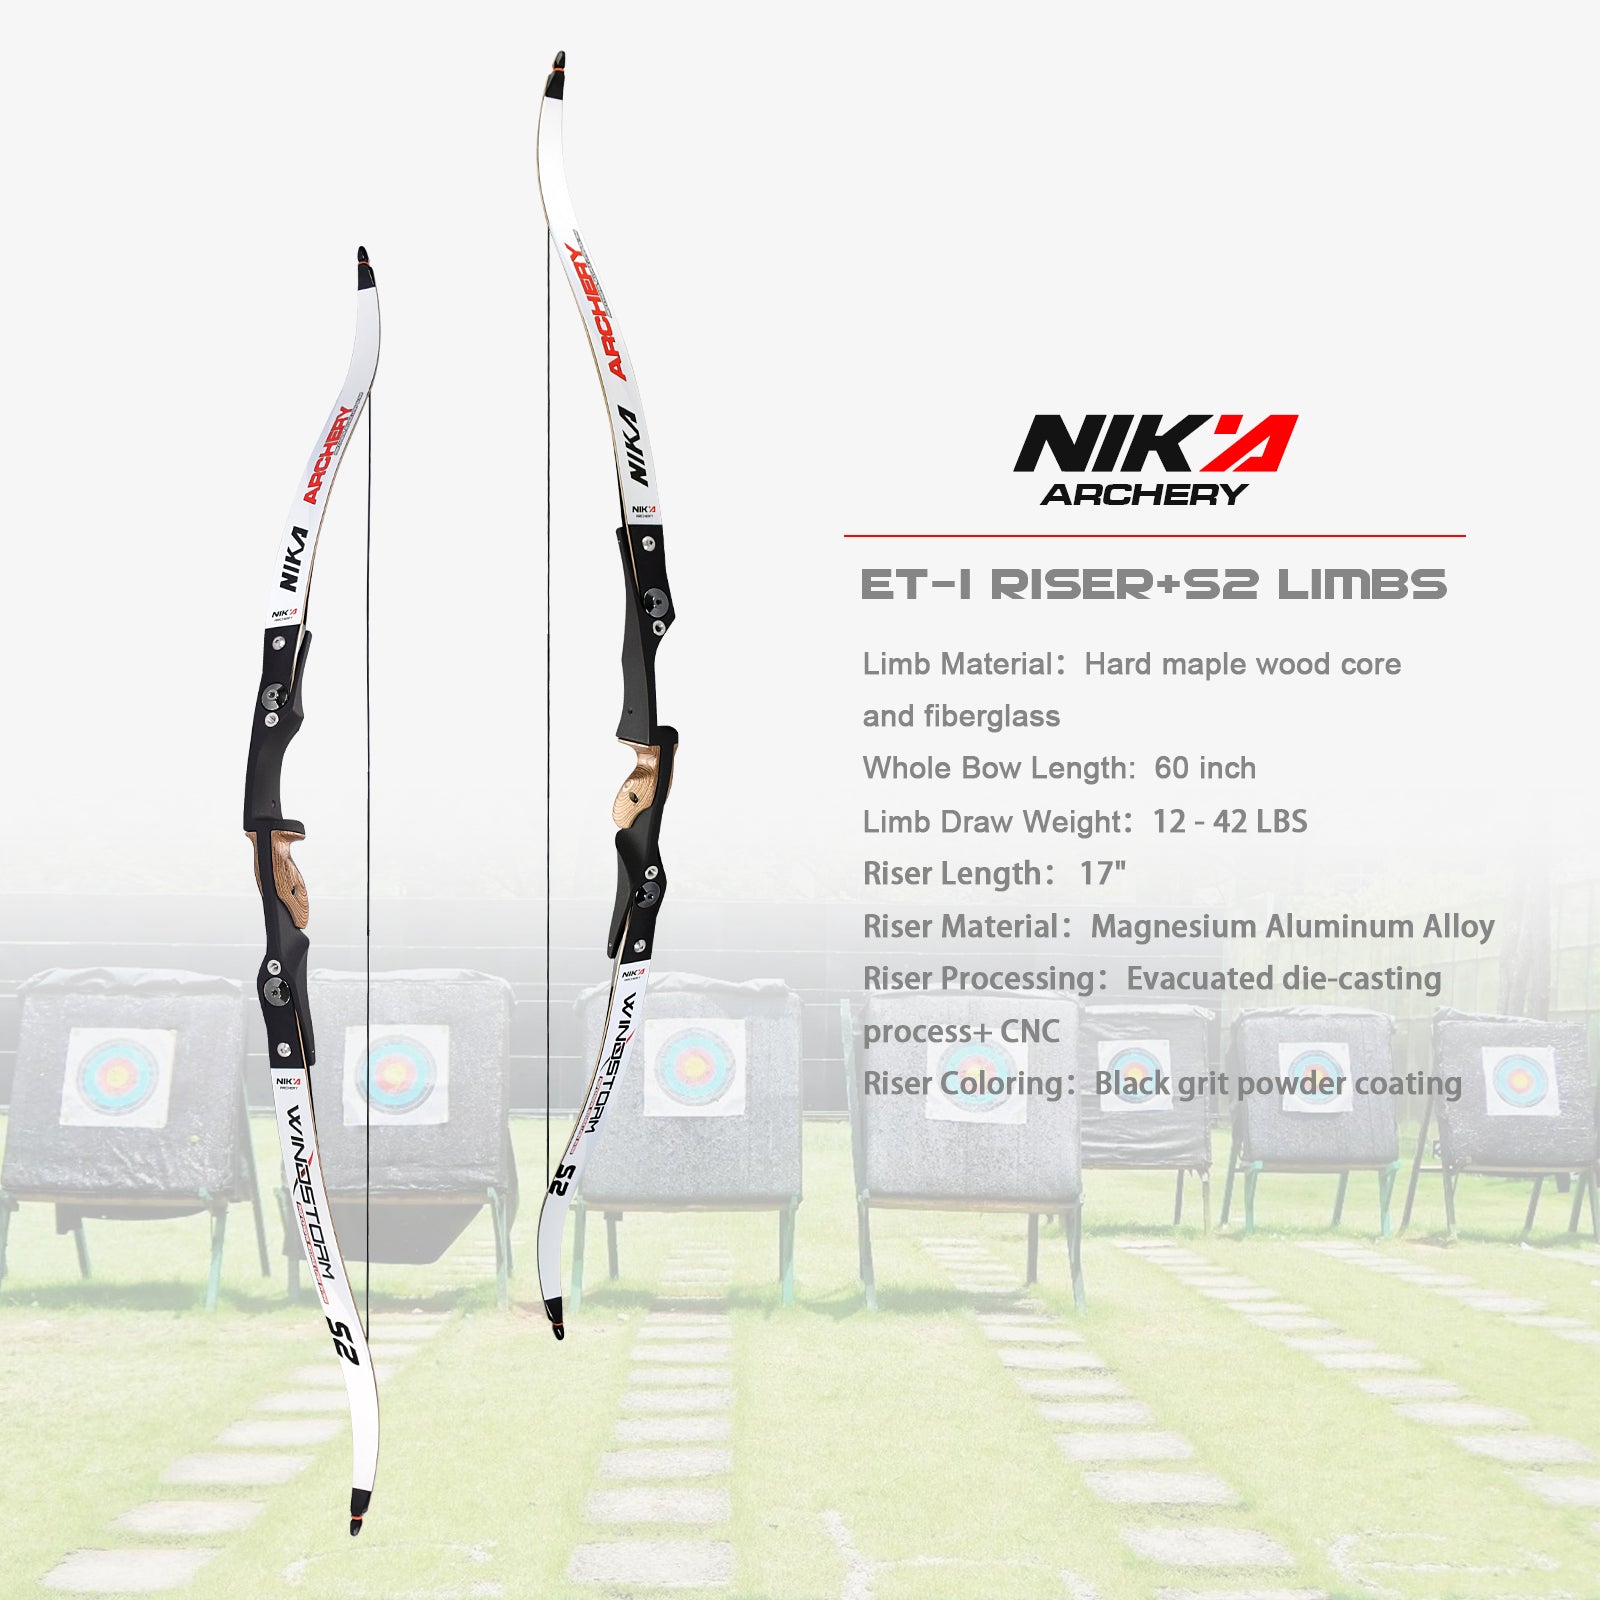 60" Archery Recurve Bow ET-1 ILF Riser Wood Magnesium Alloy Handle with S2 12-42LBS Limb for Right Hand